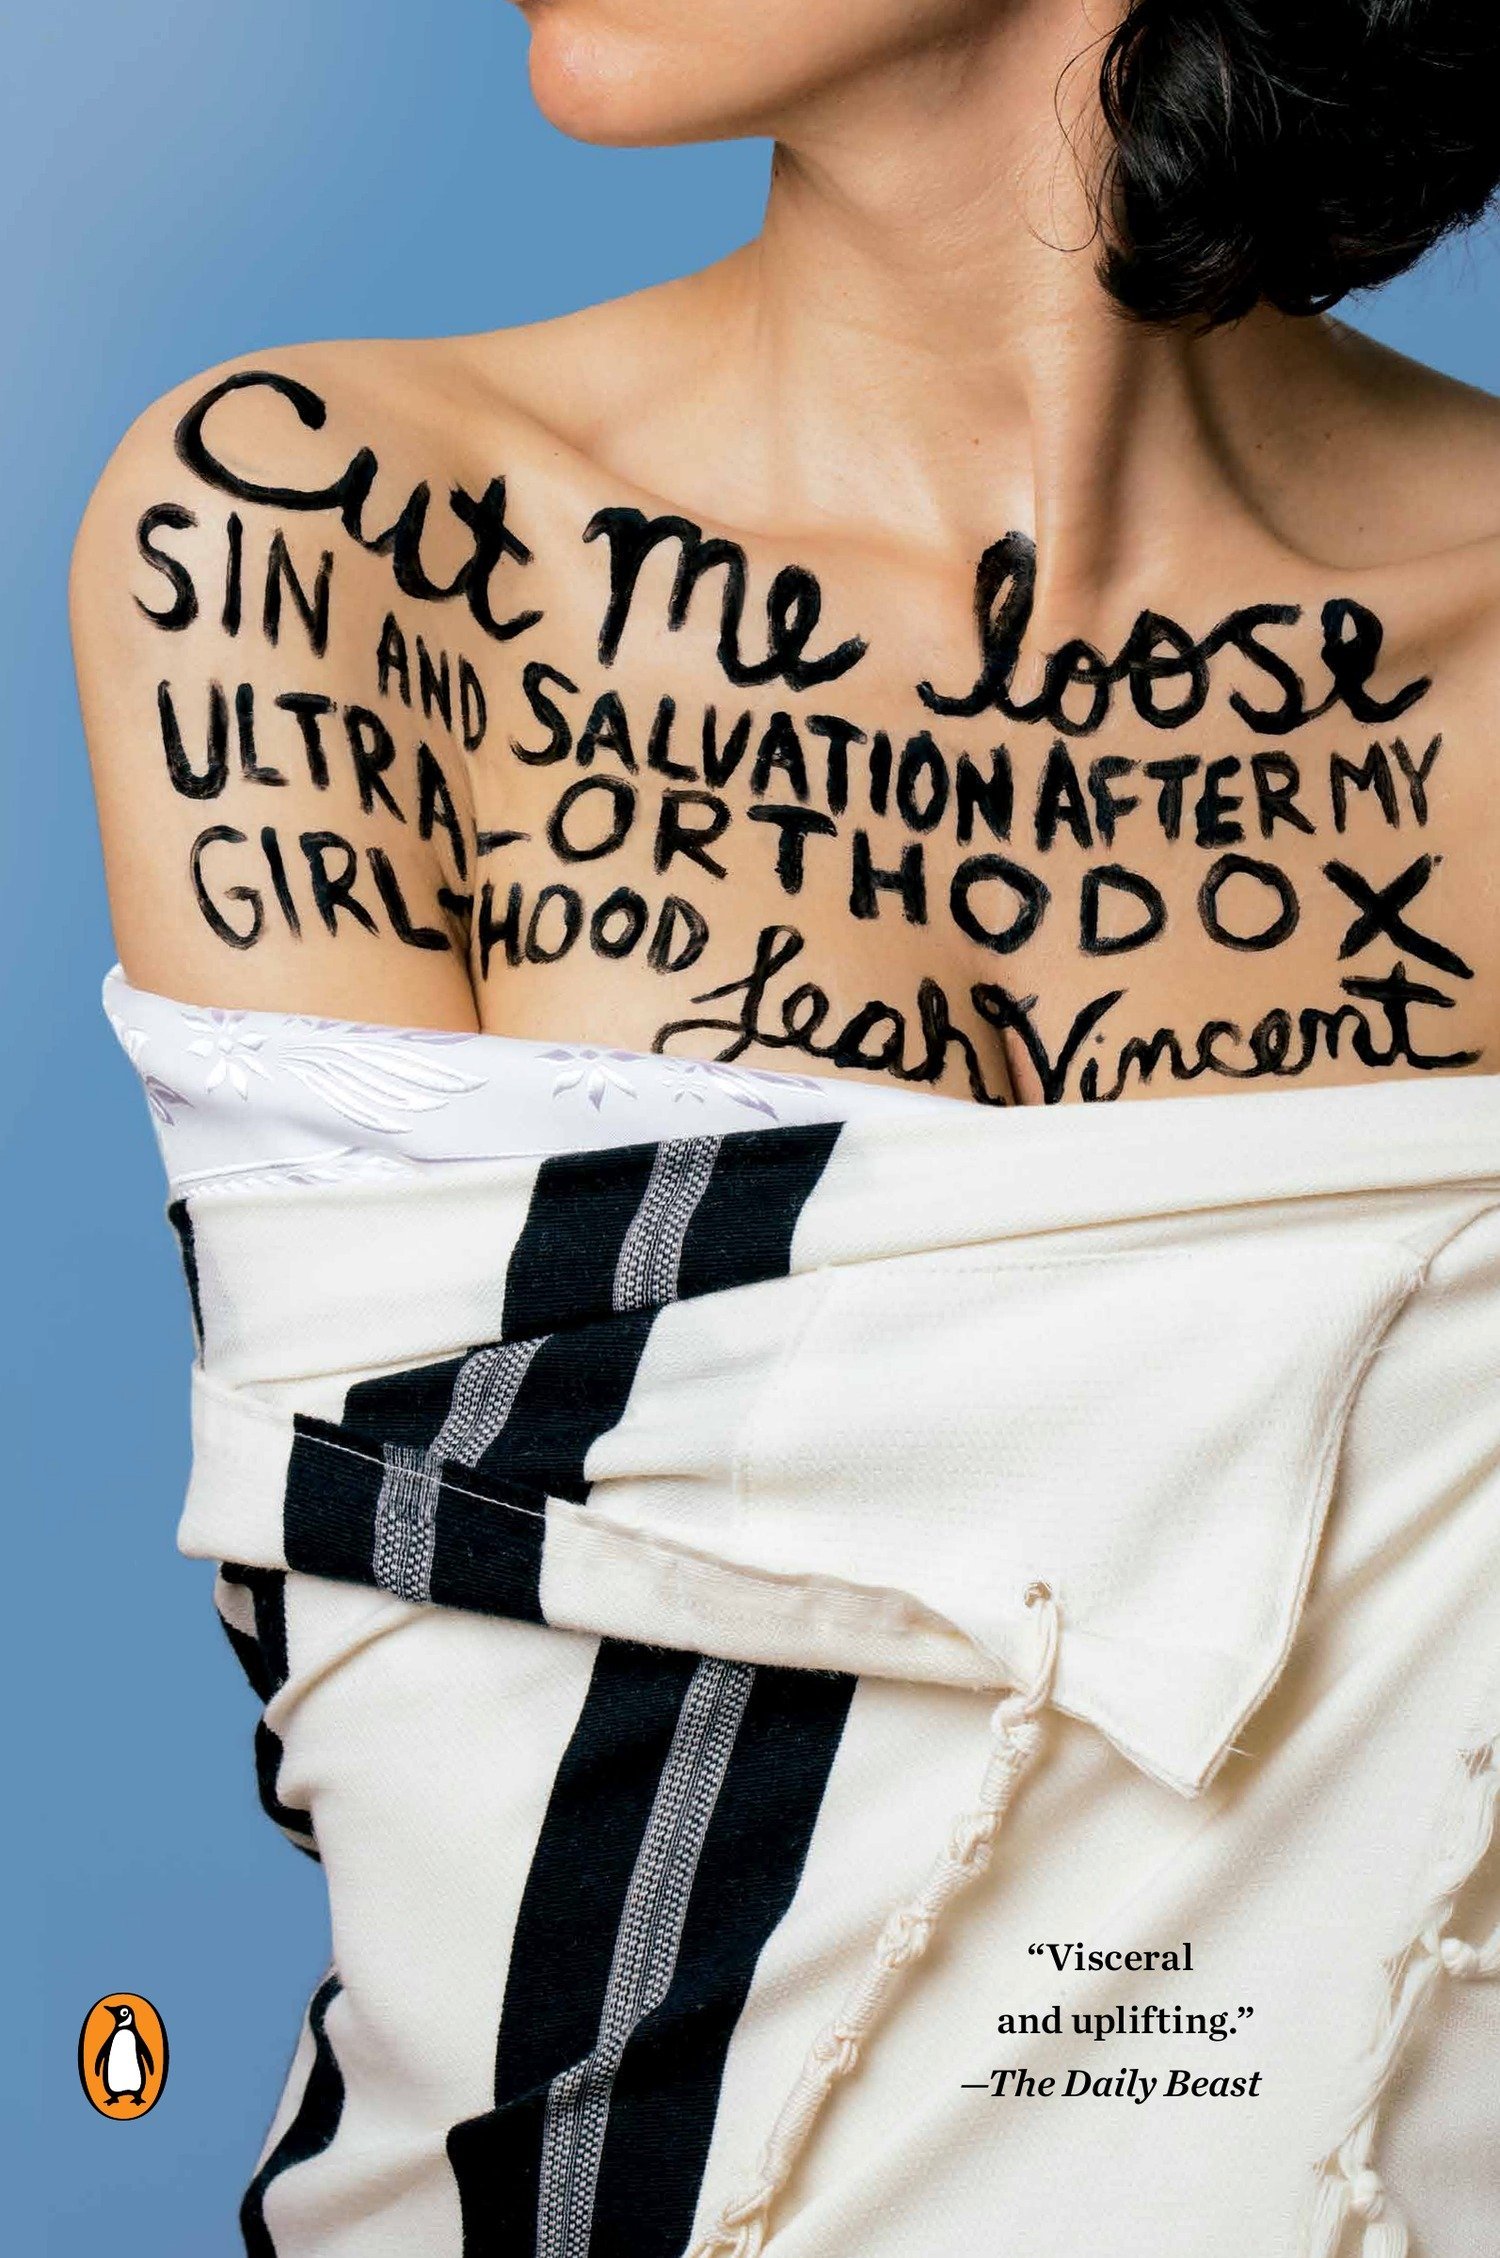 Cut Me Loose - Sin and Salvation my Ultra-Orthodox Girlhood by Leah Vincent